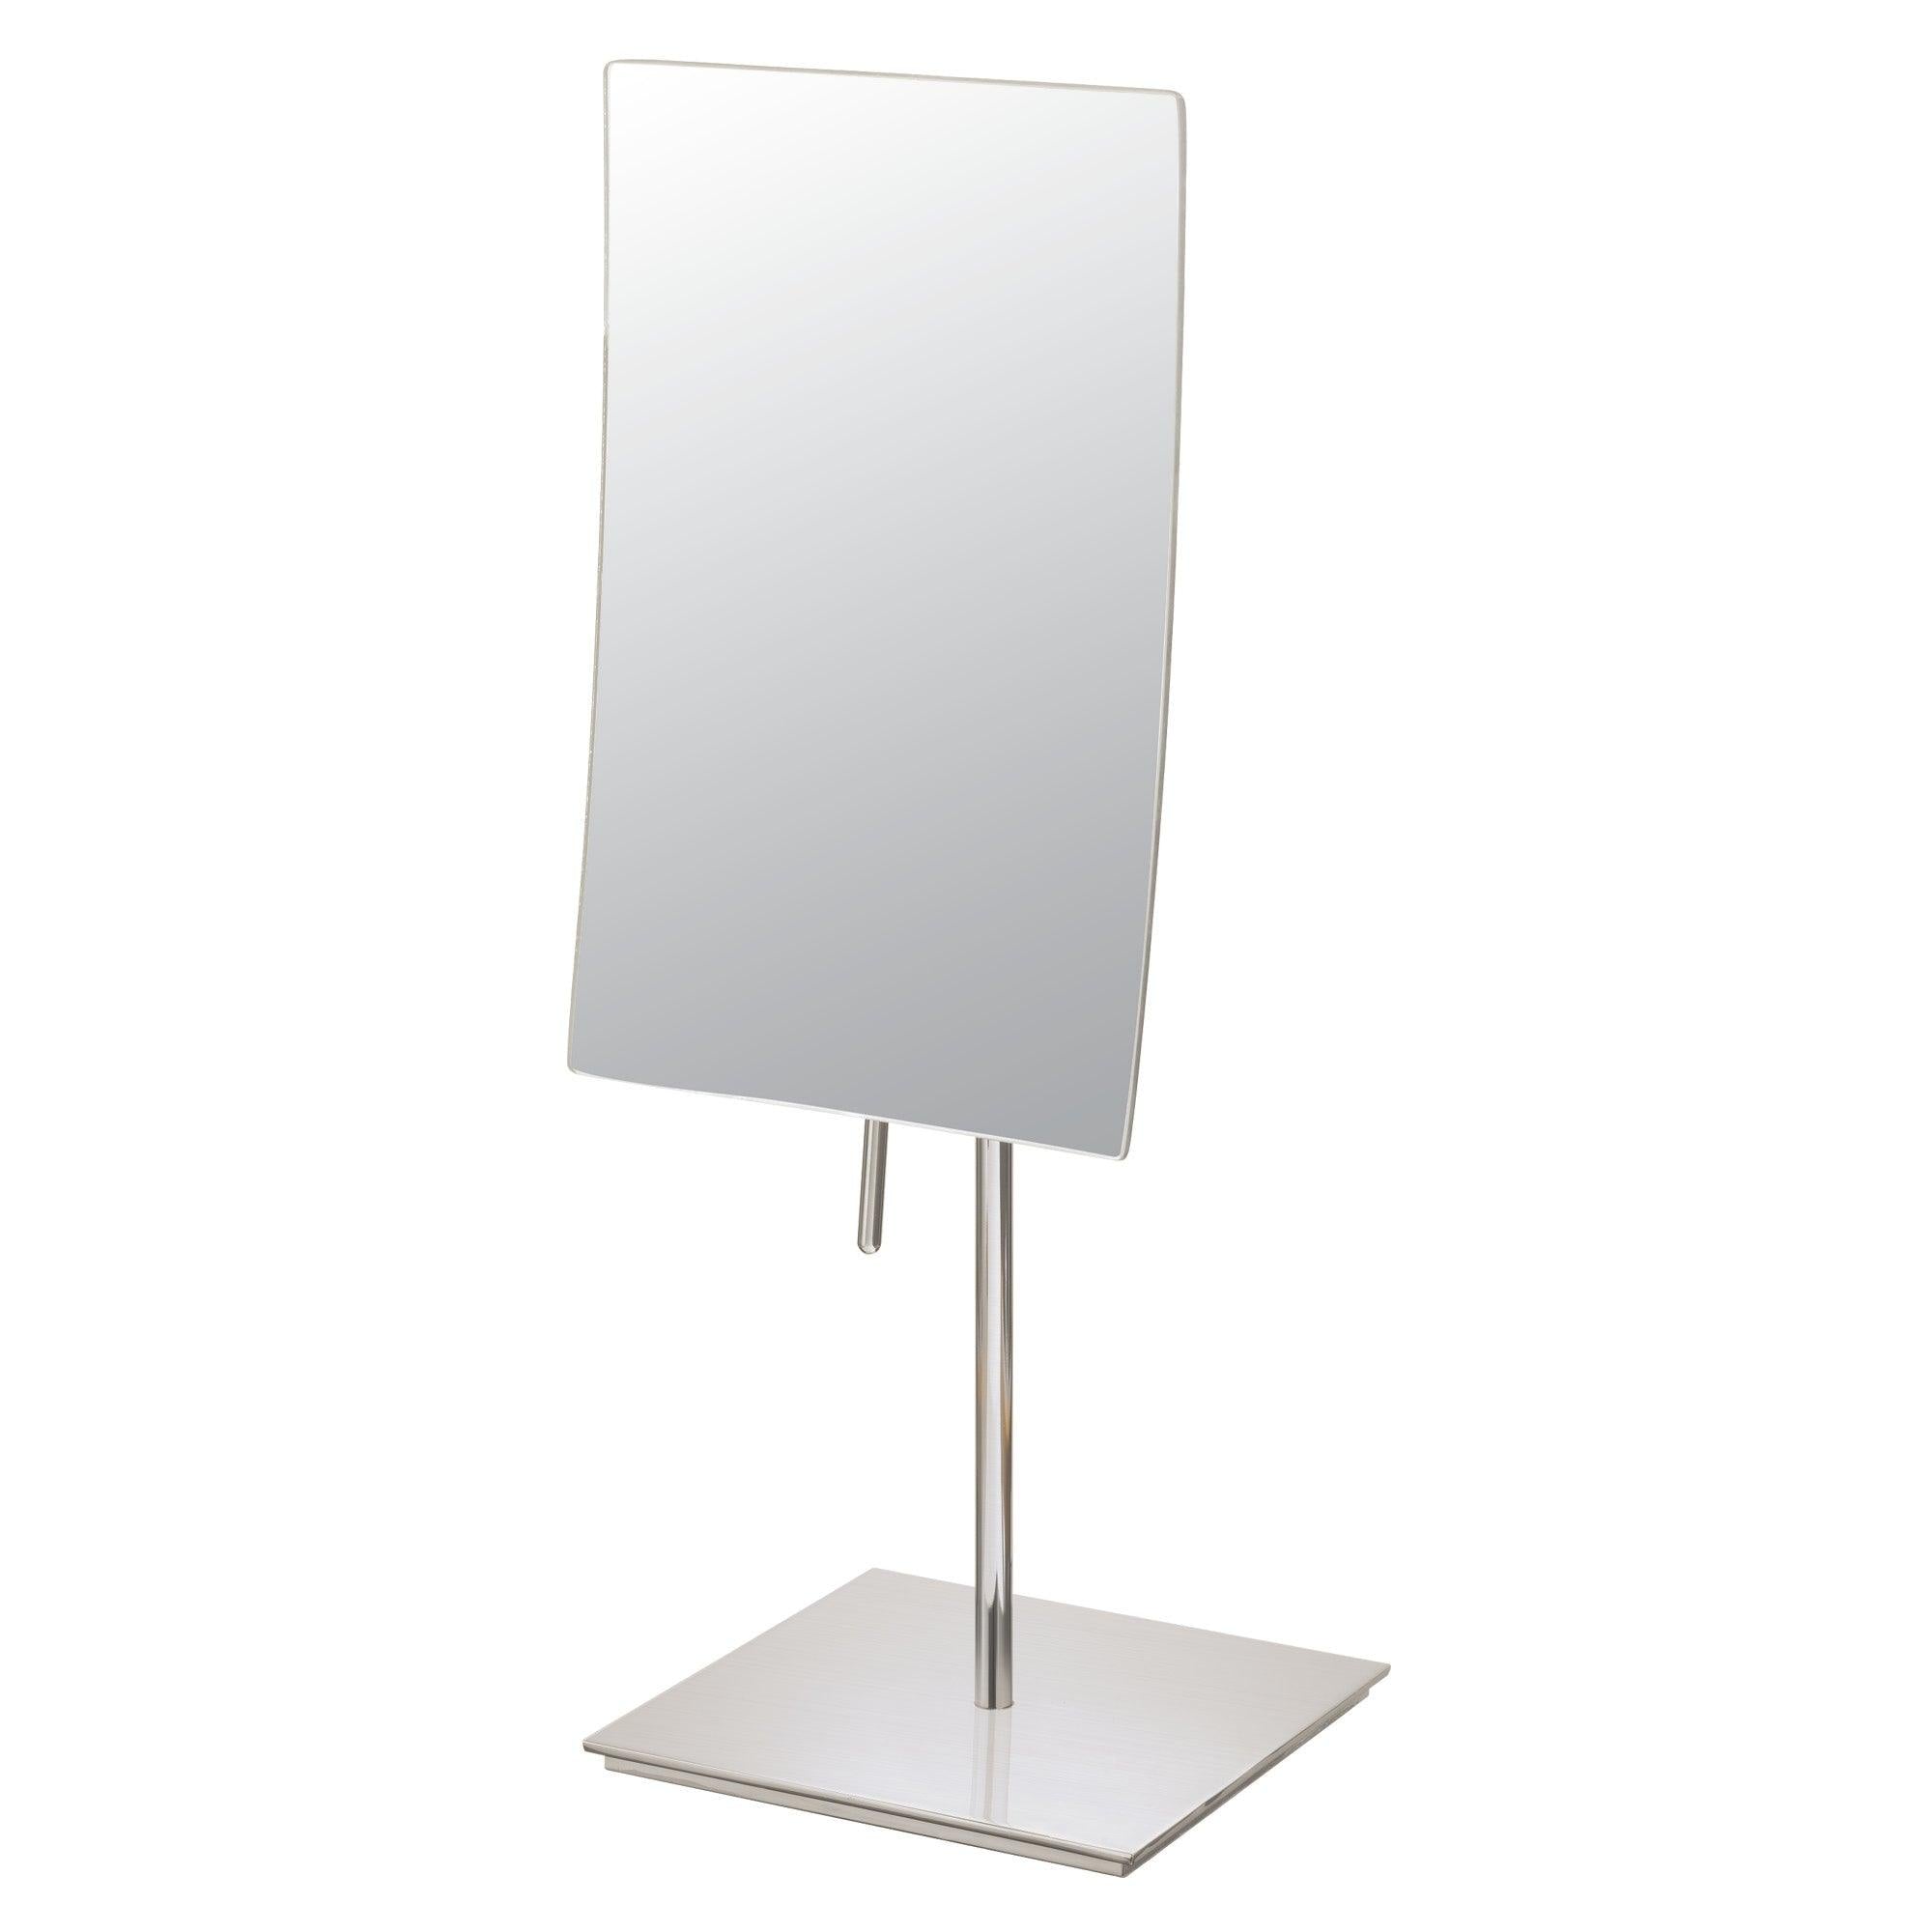 82273 3X Rectangular Single-sided Non-lighted Freestanding Mirror - Hardware by Design